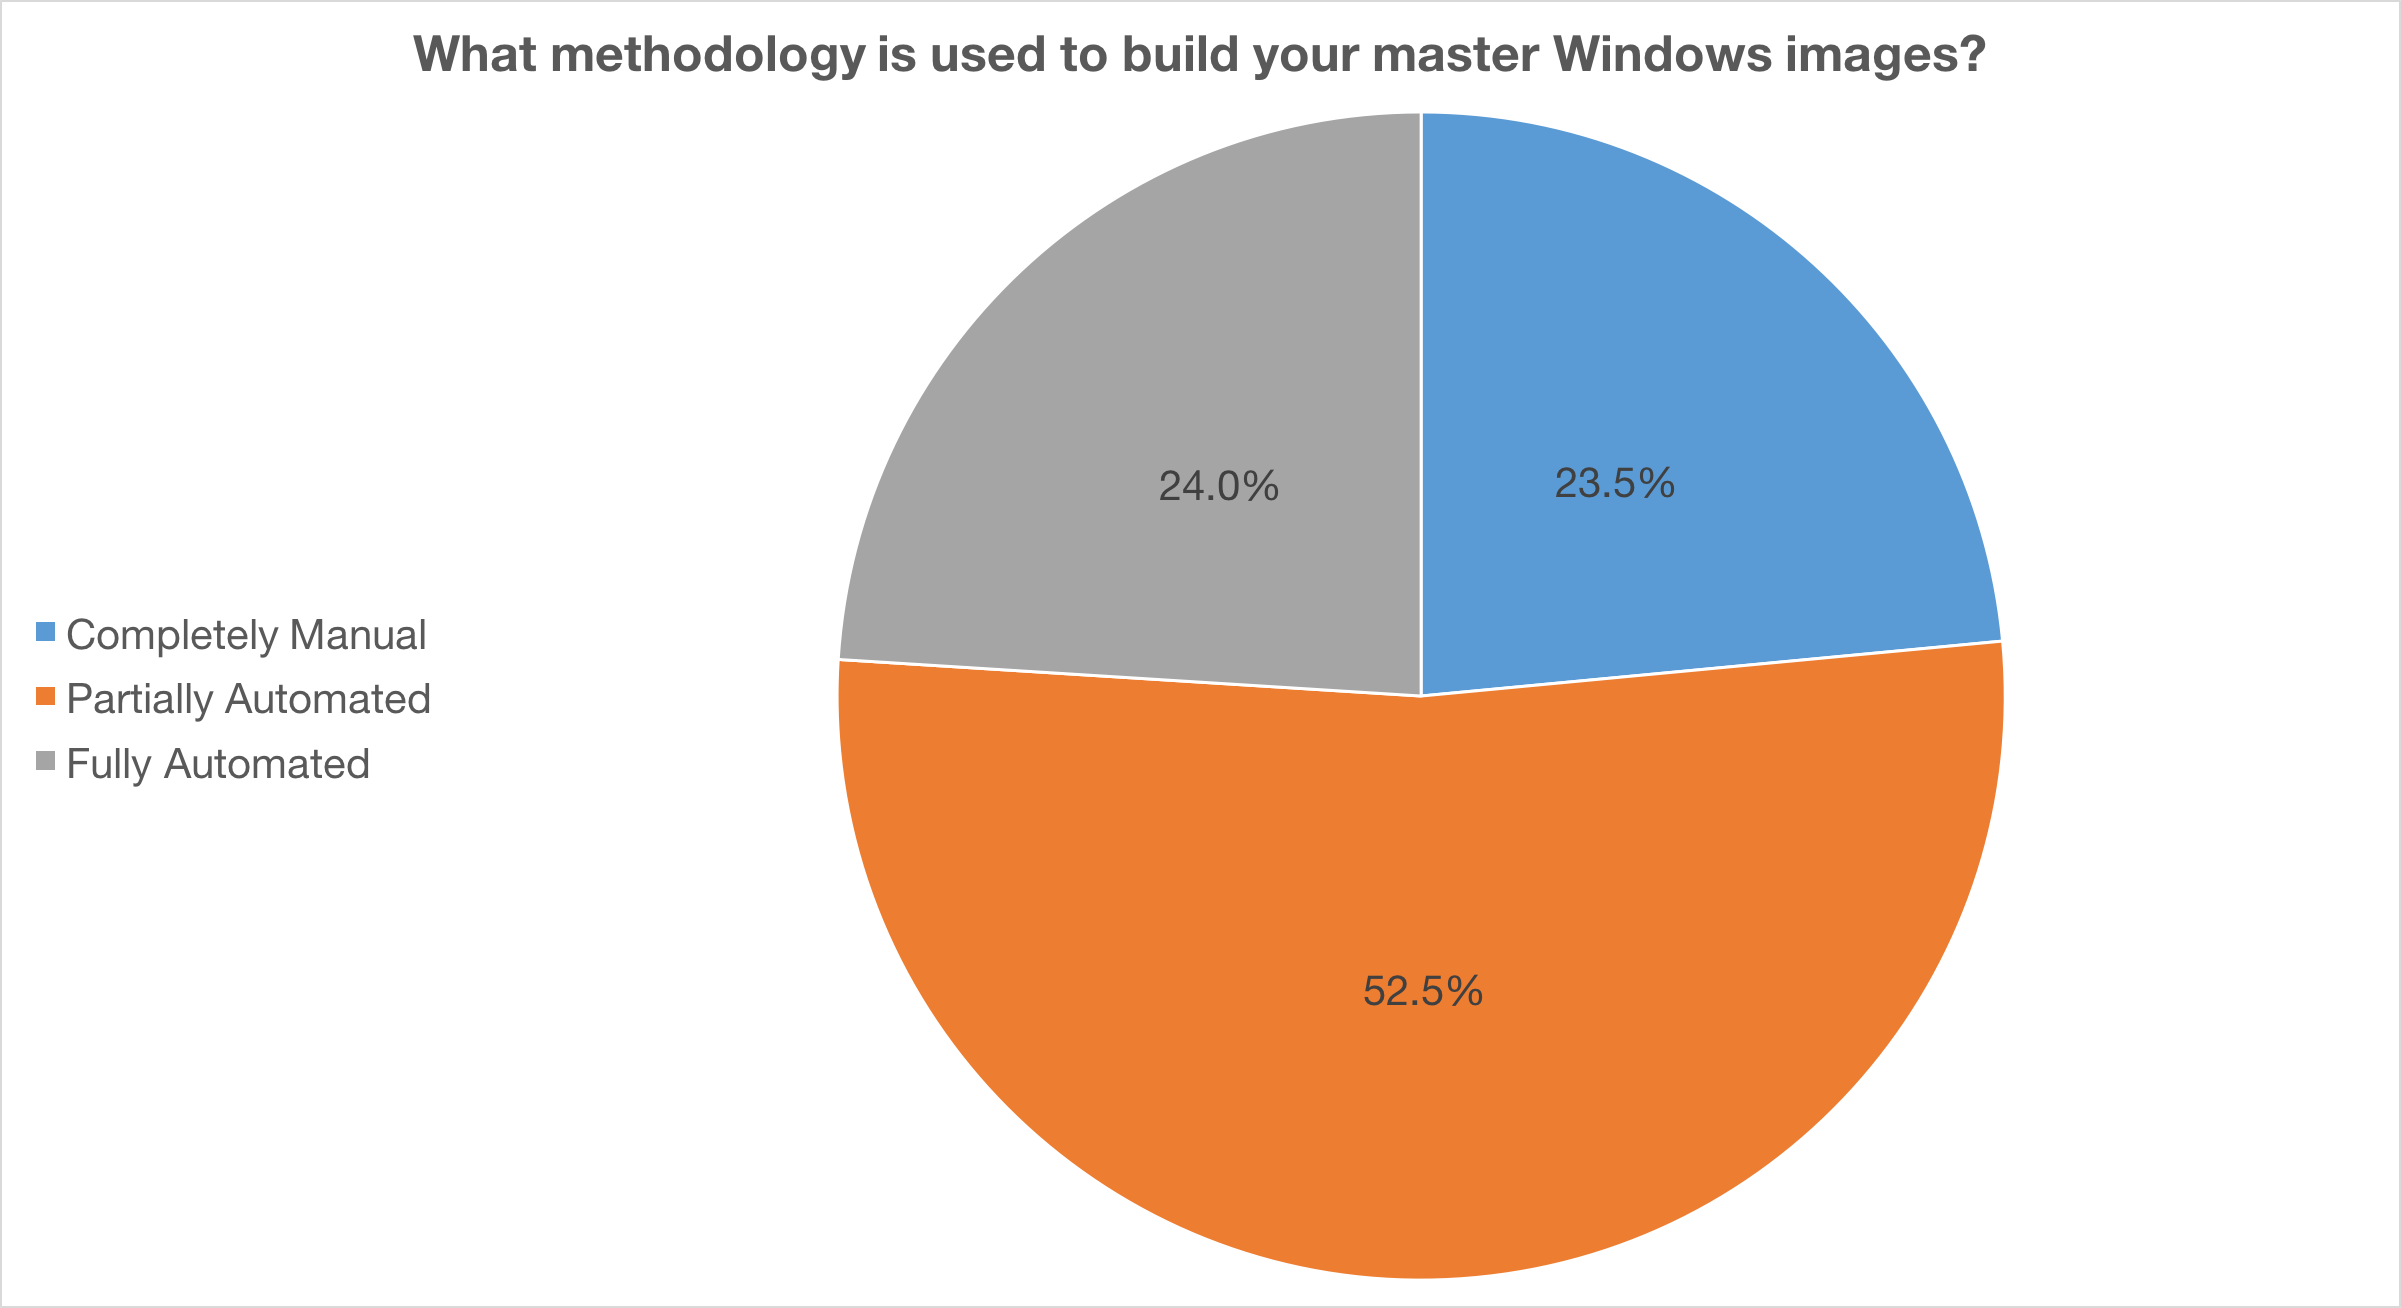 Breakdown of how respondents are building master images